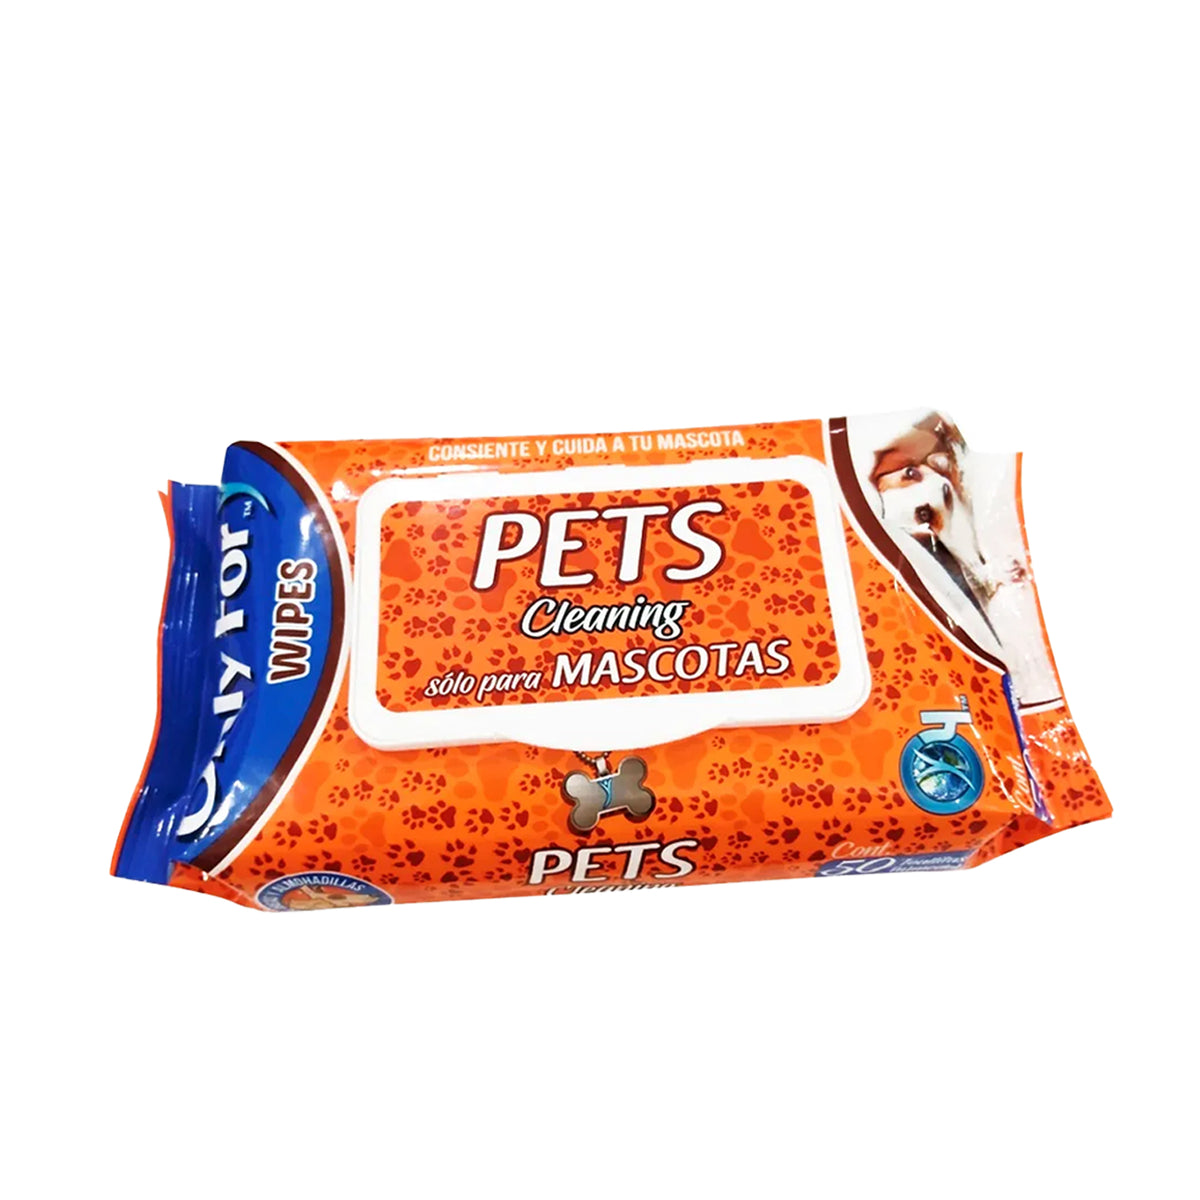 Wet Wipes For pets